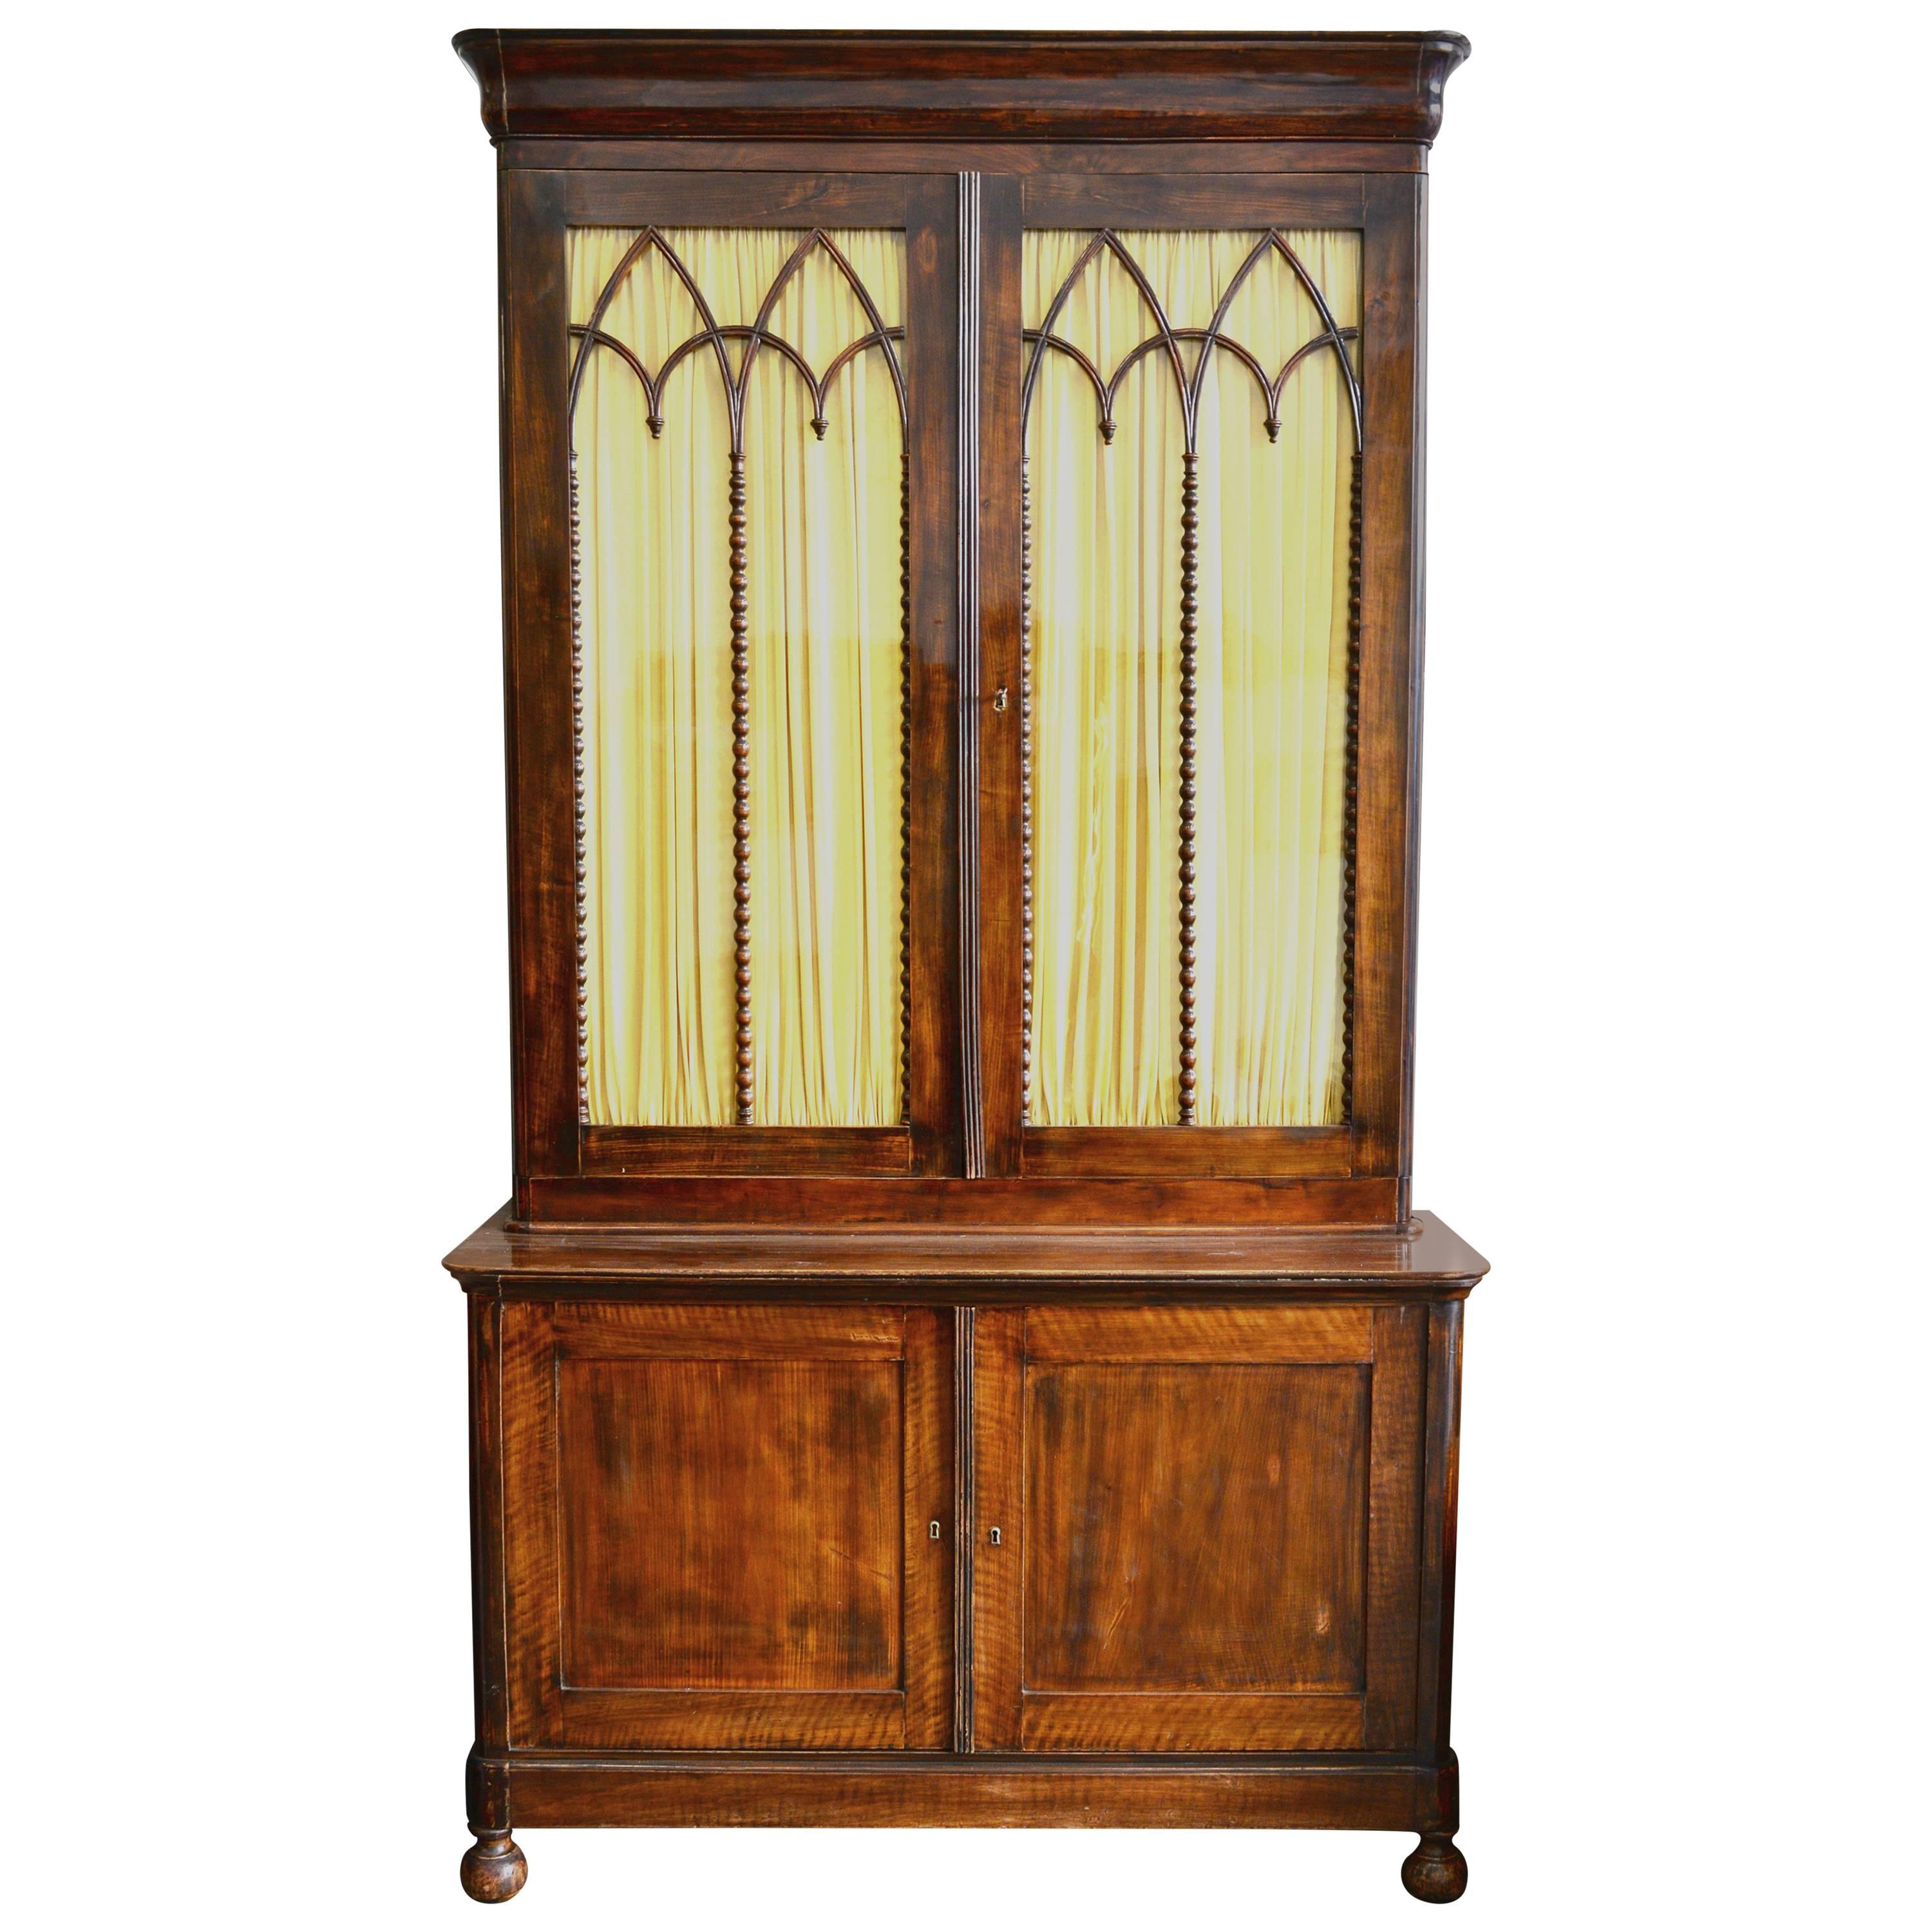 French mahogany Louis Philippe step back bookcase with four doors, circa 1850.
The top section retains the original glass and three(adjustable) shelves 
The interior of both the top and bottom are fitted with shelves and the original step system